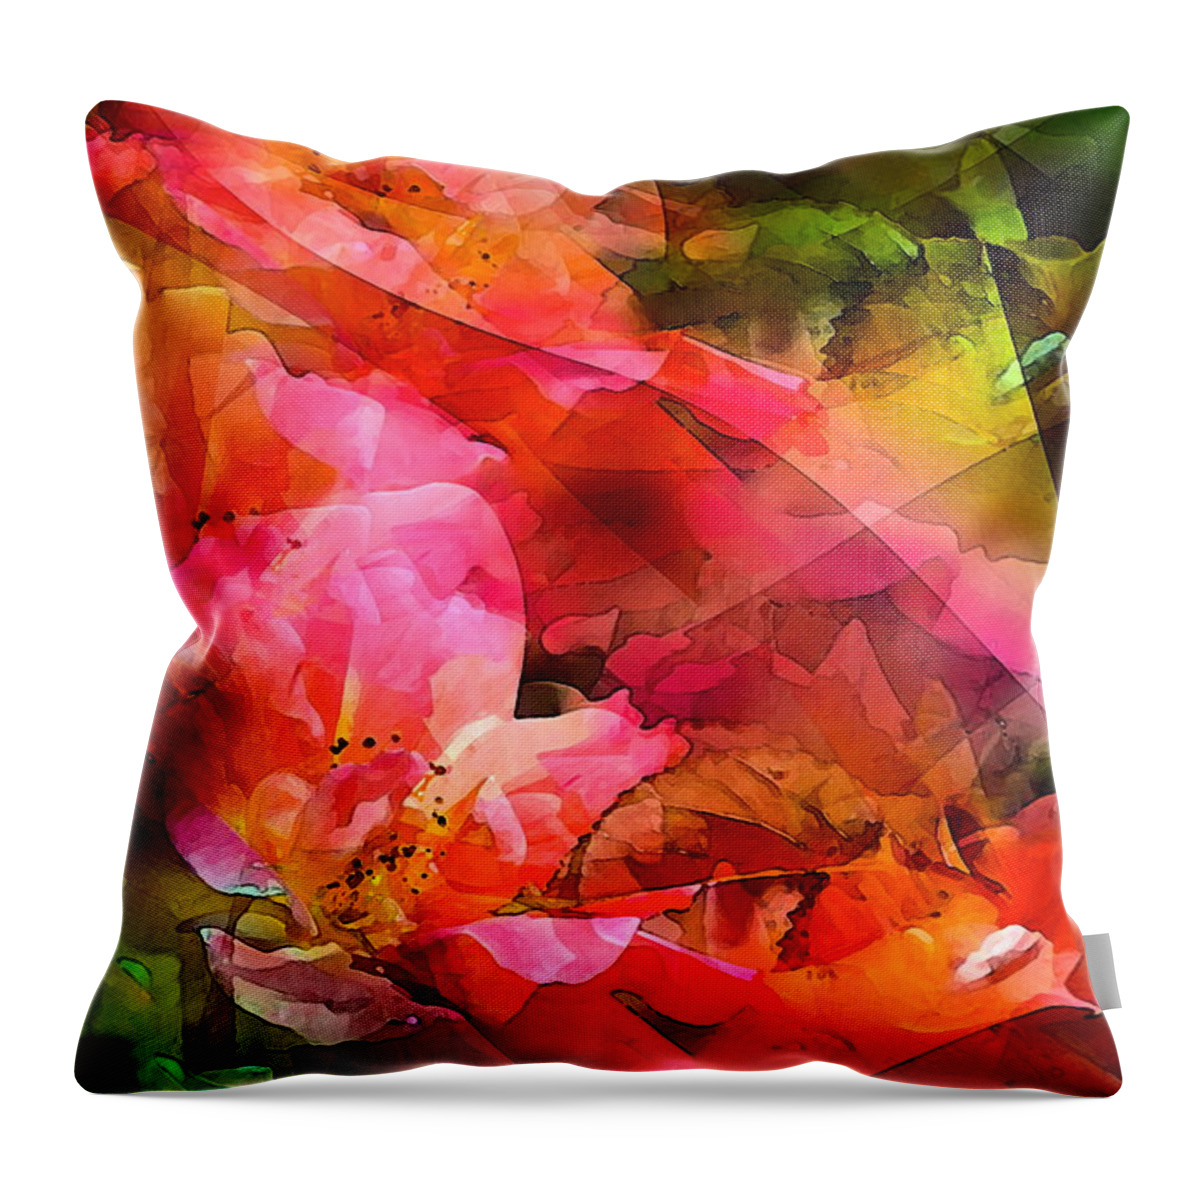 Abstract Throw Pillow featuring the photograph Abstract 273 by Pamela Cooper